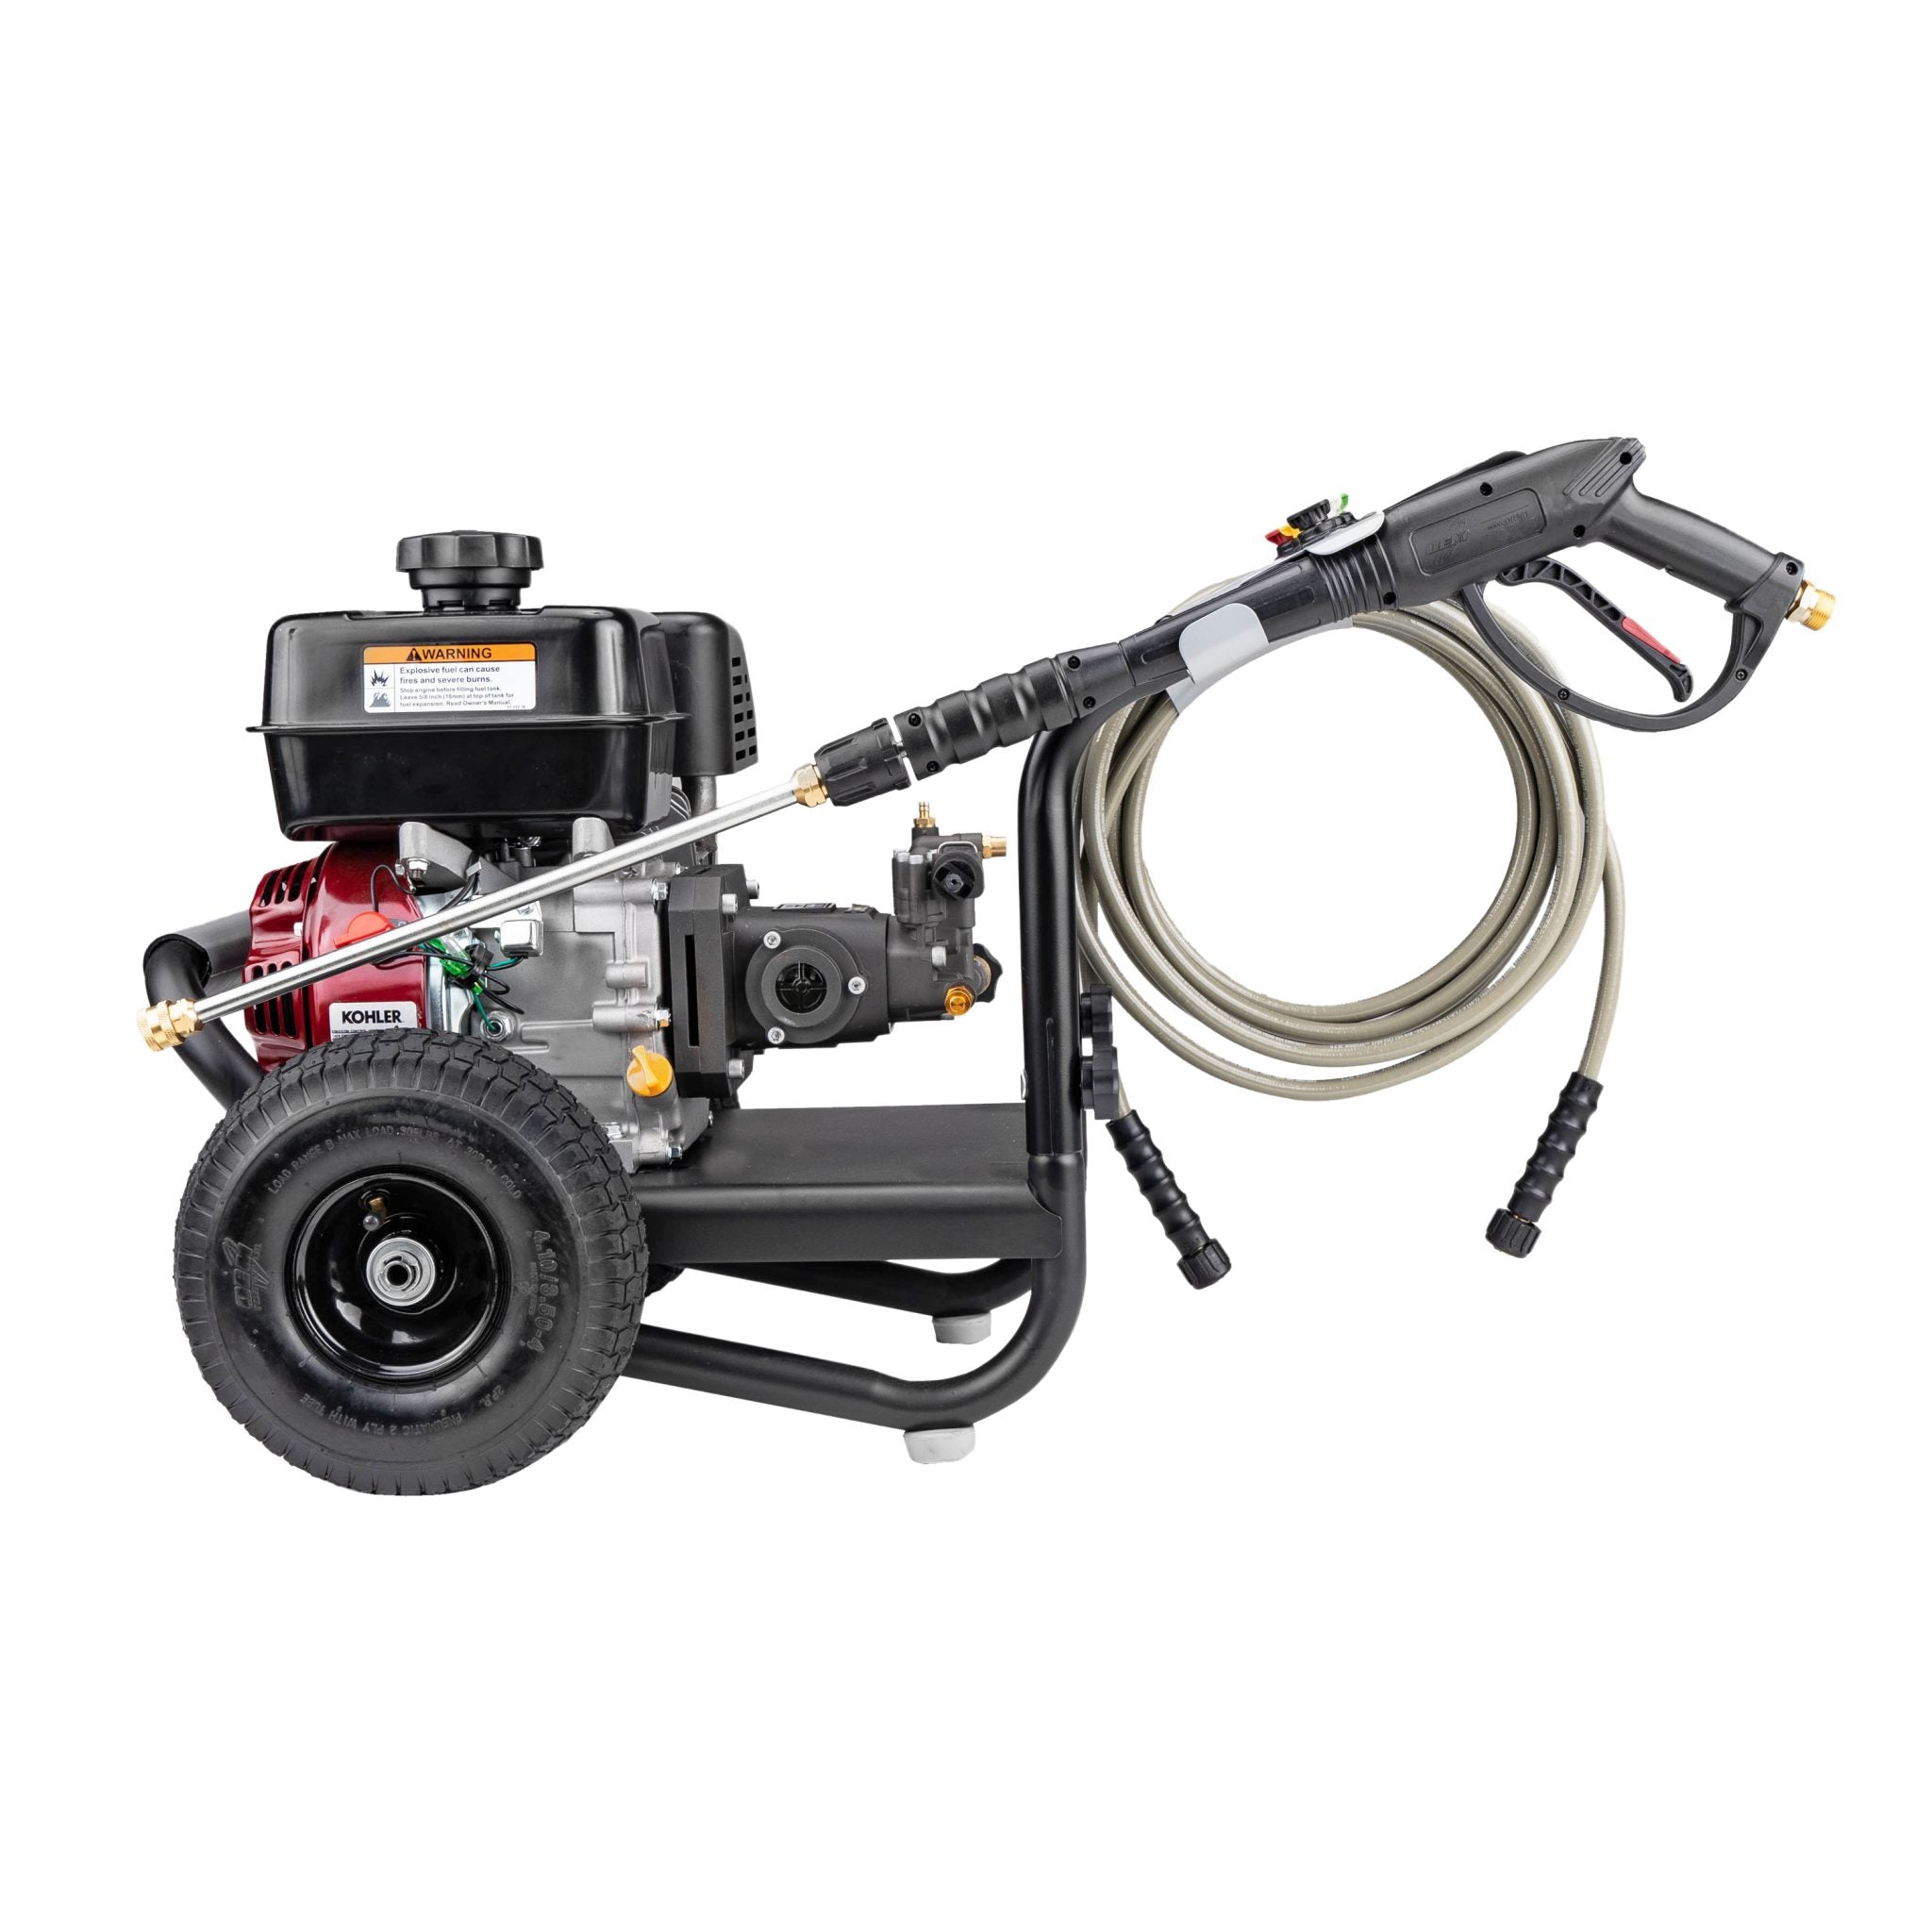 3500 PSI at 2.5 GPM KOHLER SH270 AAAAX300 PRO Axial Cam Pump Cold Water Professional Gas Pressure Washer (Refurbished)